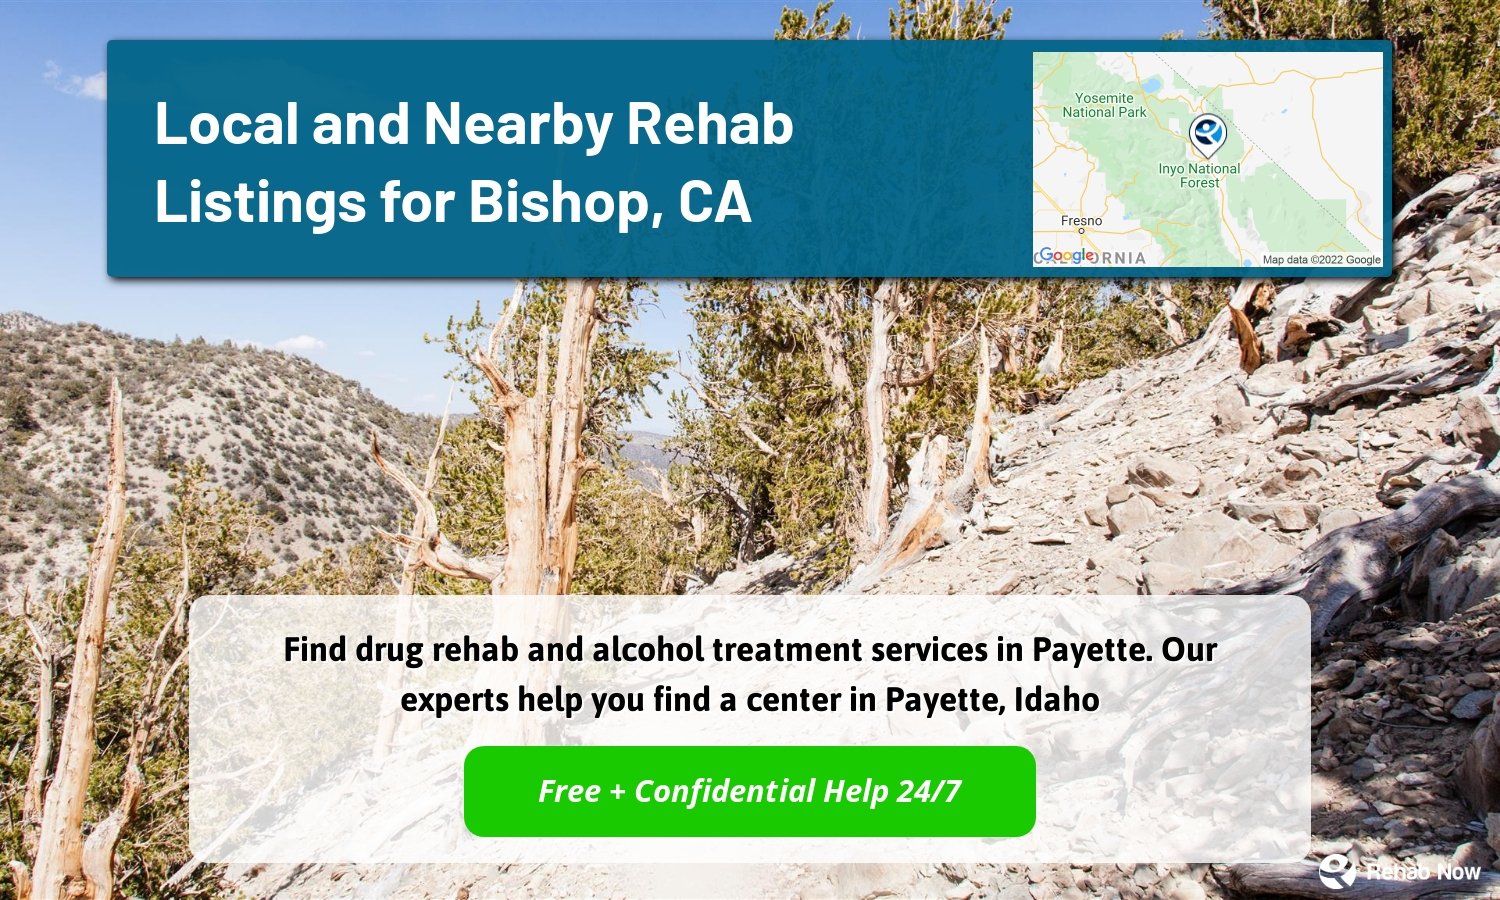 Find drug rehab and alcohol treatment services in Payette. Our experts help you find a center in Payette, Idaho